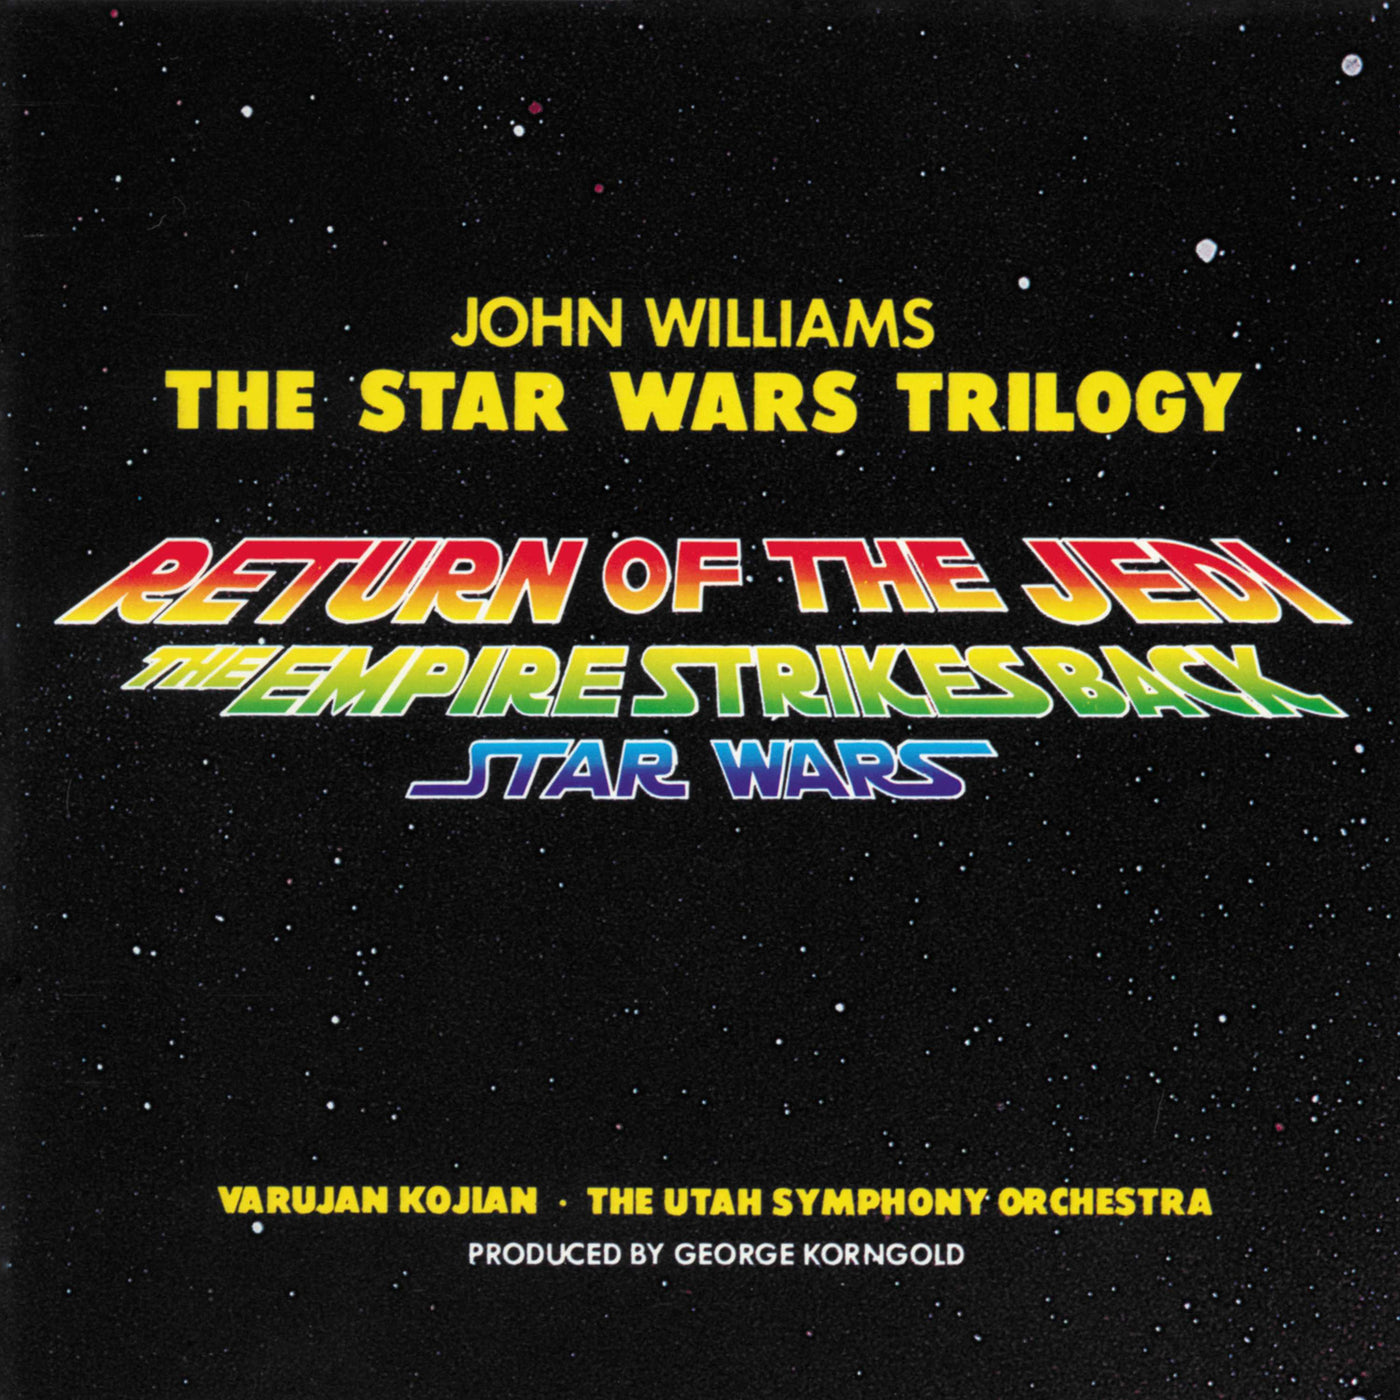 Star Wars Trilogy, The (CD)